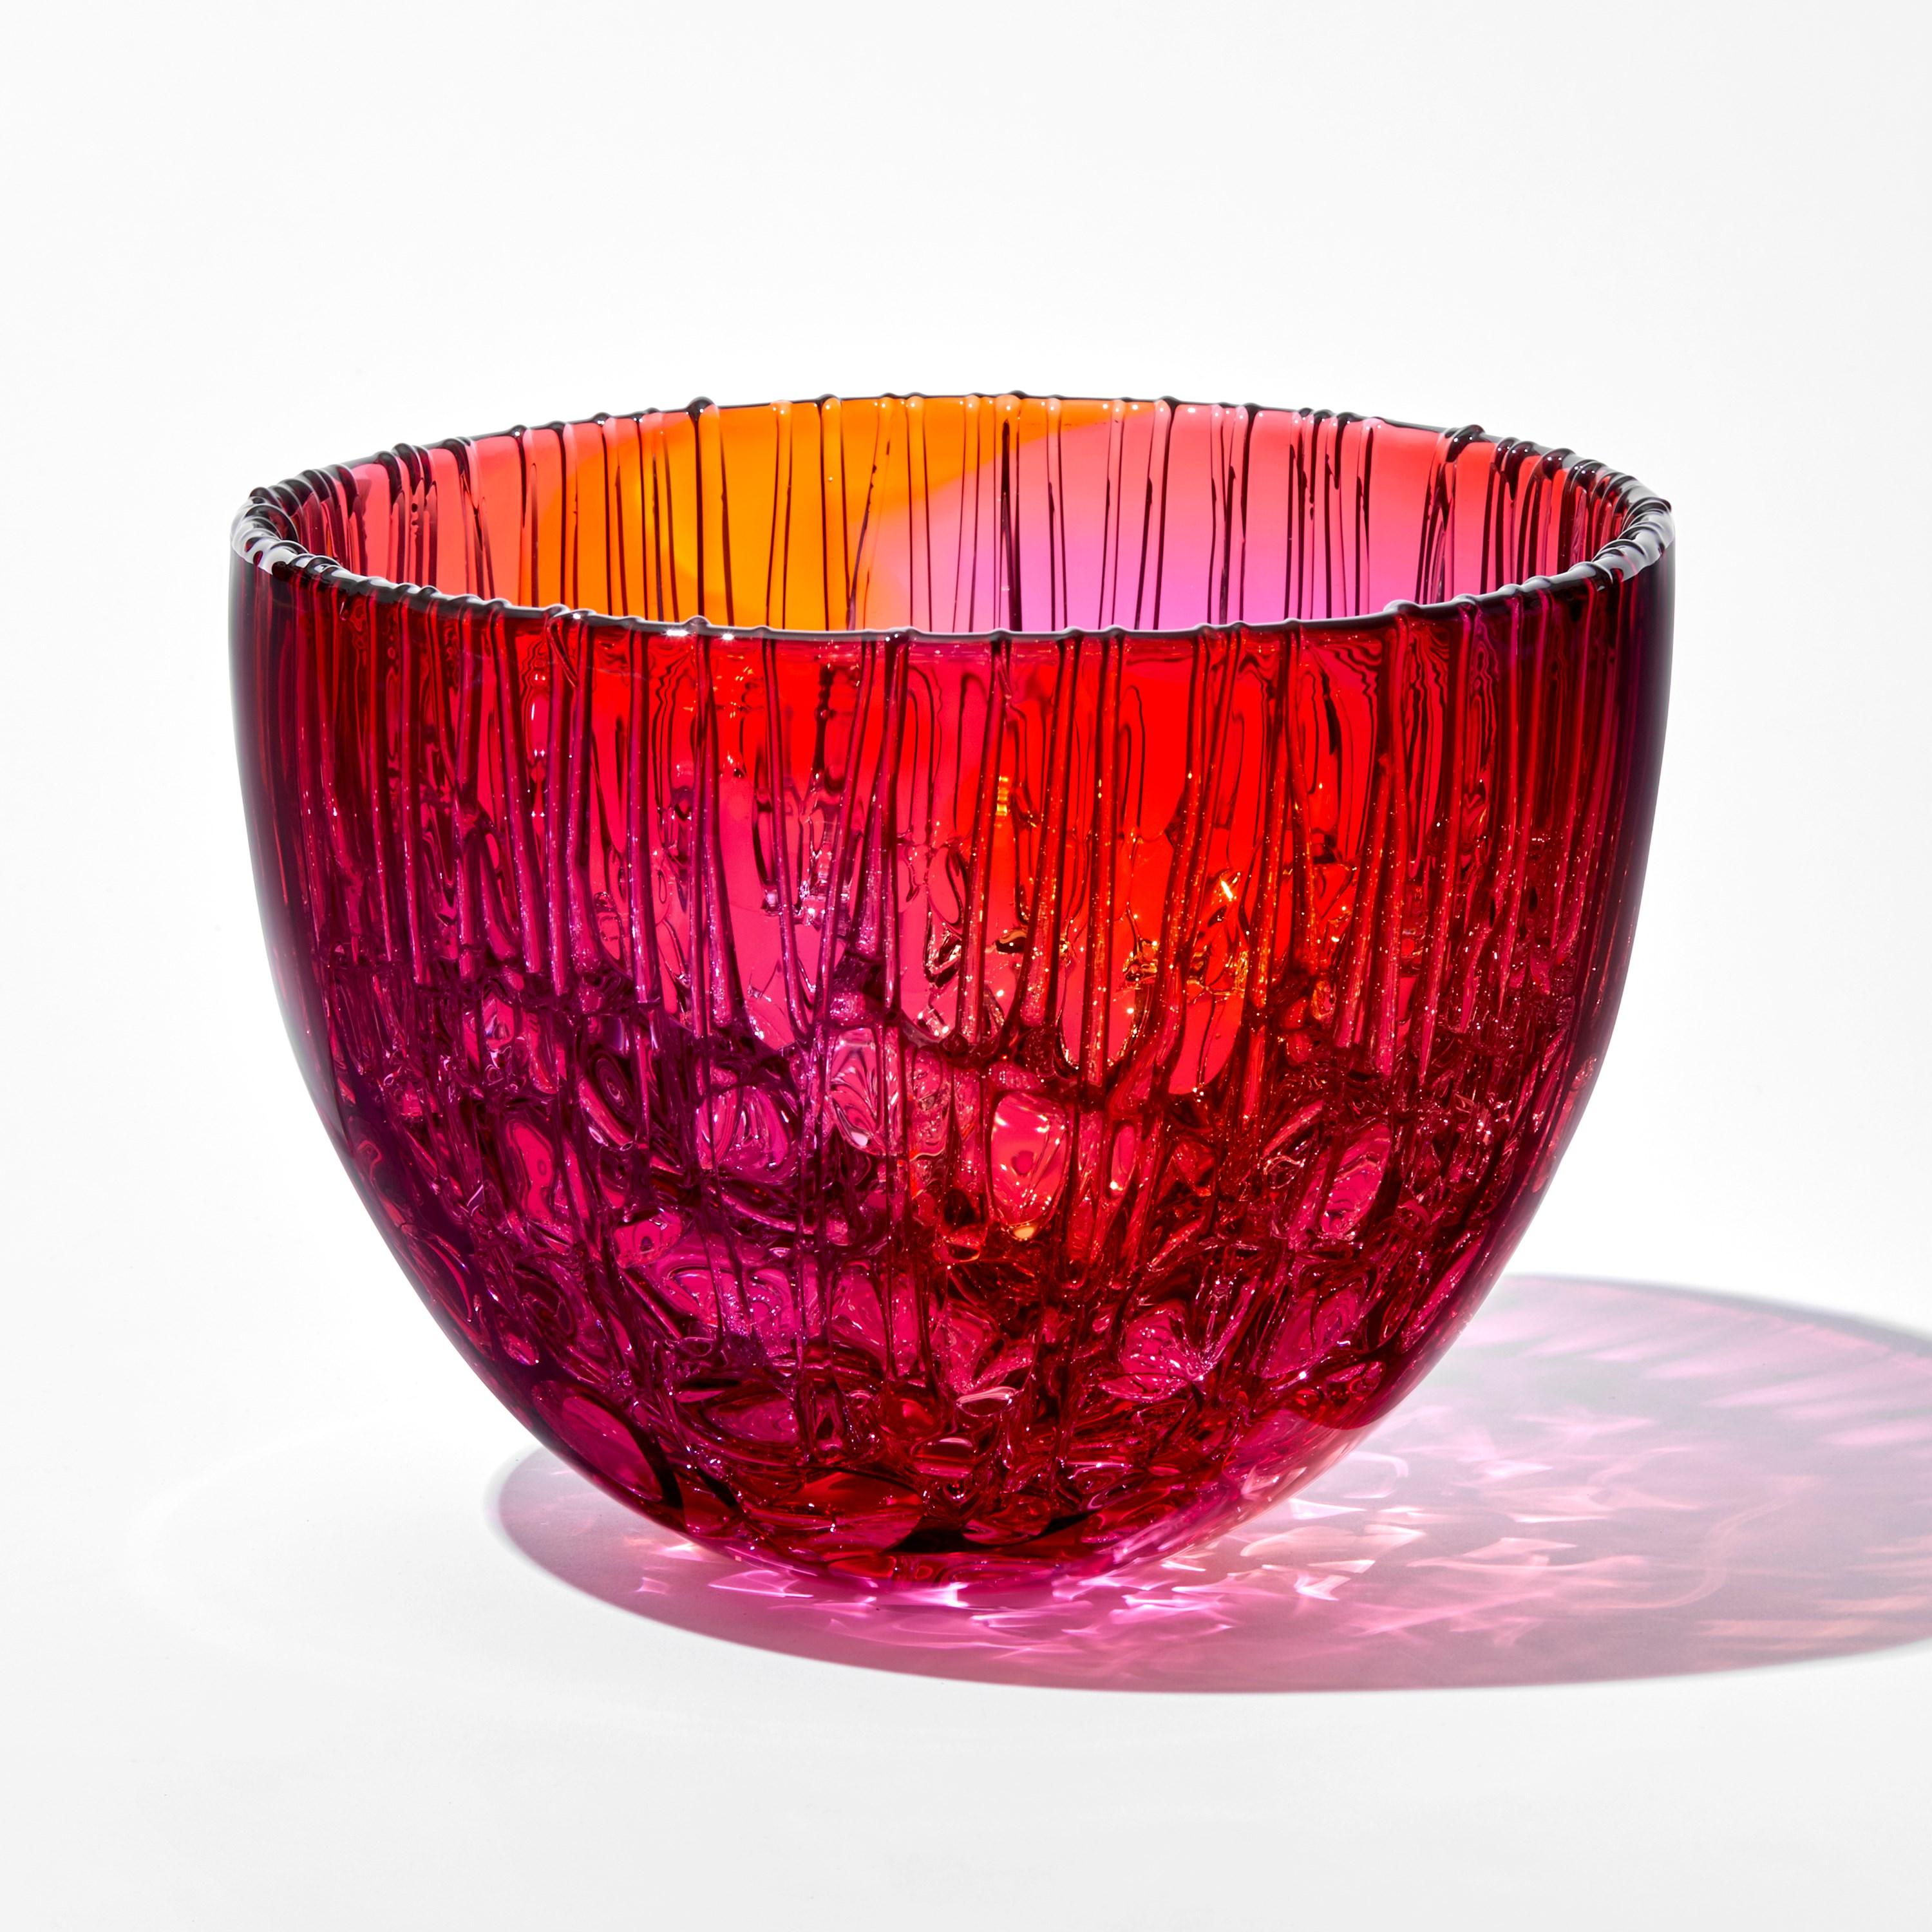 Cassito in Fuchsia & Gold is a unique handblown and sculpted decorative glass centrepiece by the British artist, Katherine Huskie.

Huskie's work has a strong identity with form, colour and especially pattern, taking inspiration from nature,